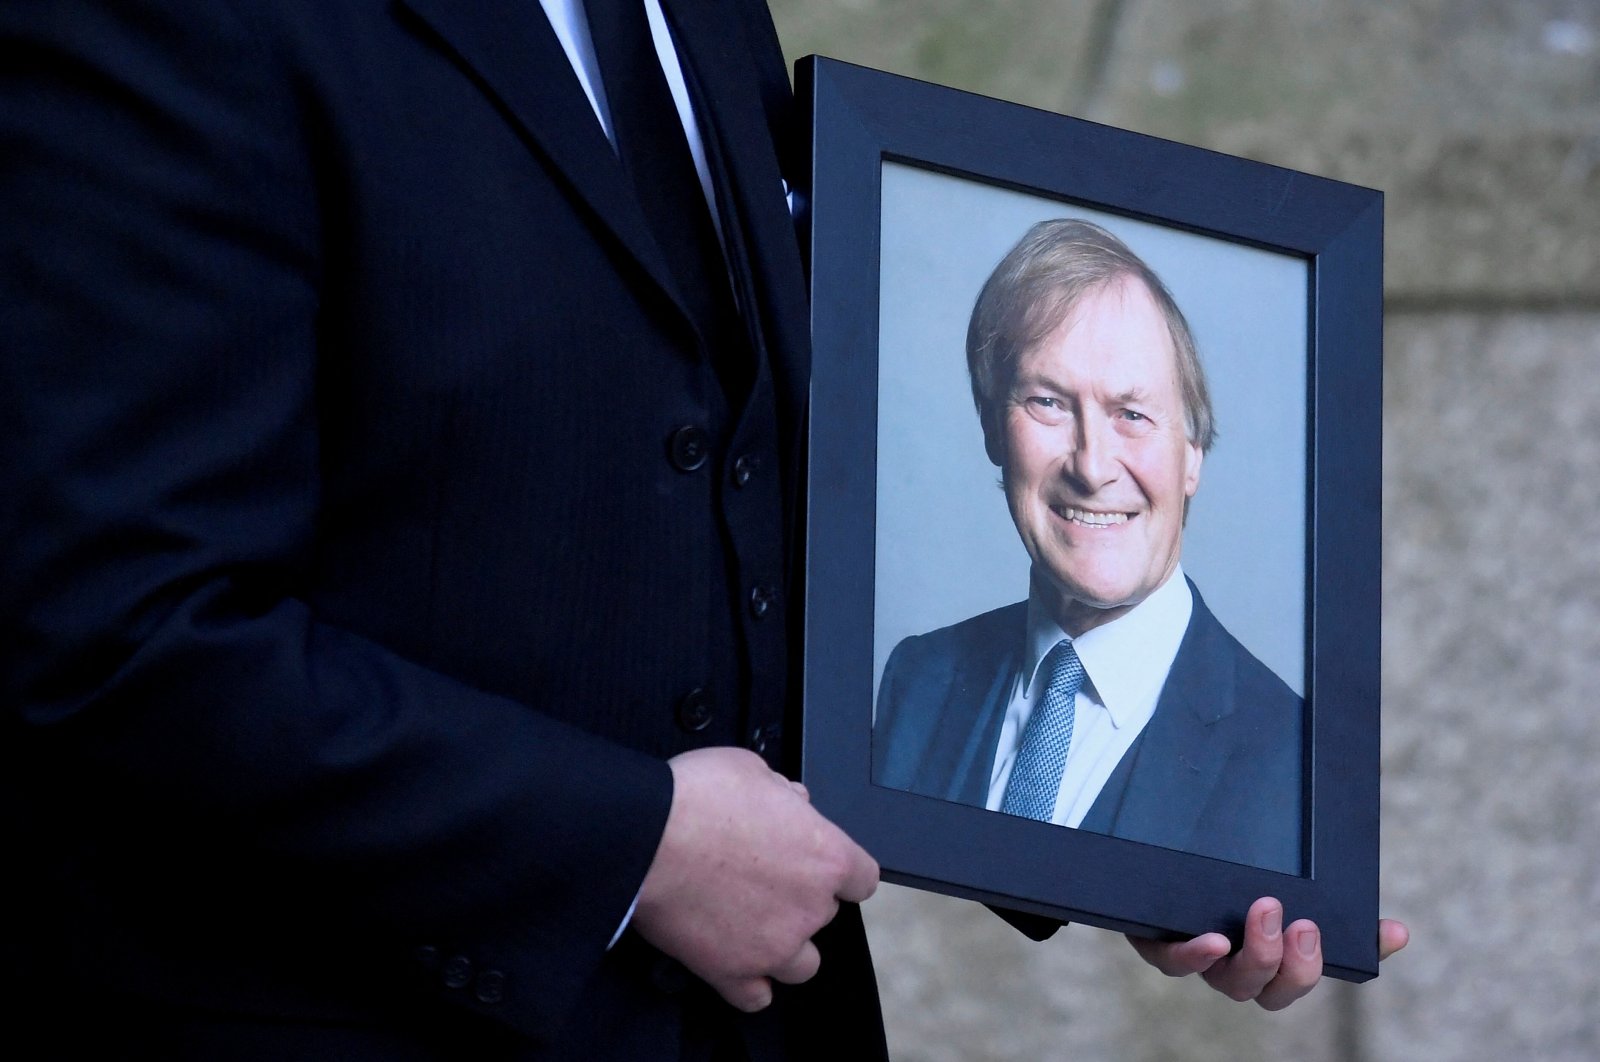 A portrait of British politician David Amess, who was stabbed to death during a meeting with constituents, is carried into Westminster Cathedral for a remembrance mass in his honor, London, Britain, Nov. 23, 2021. (REUTERS PHOTO)